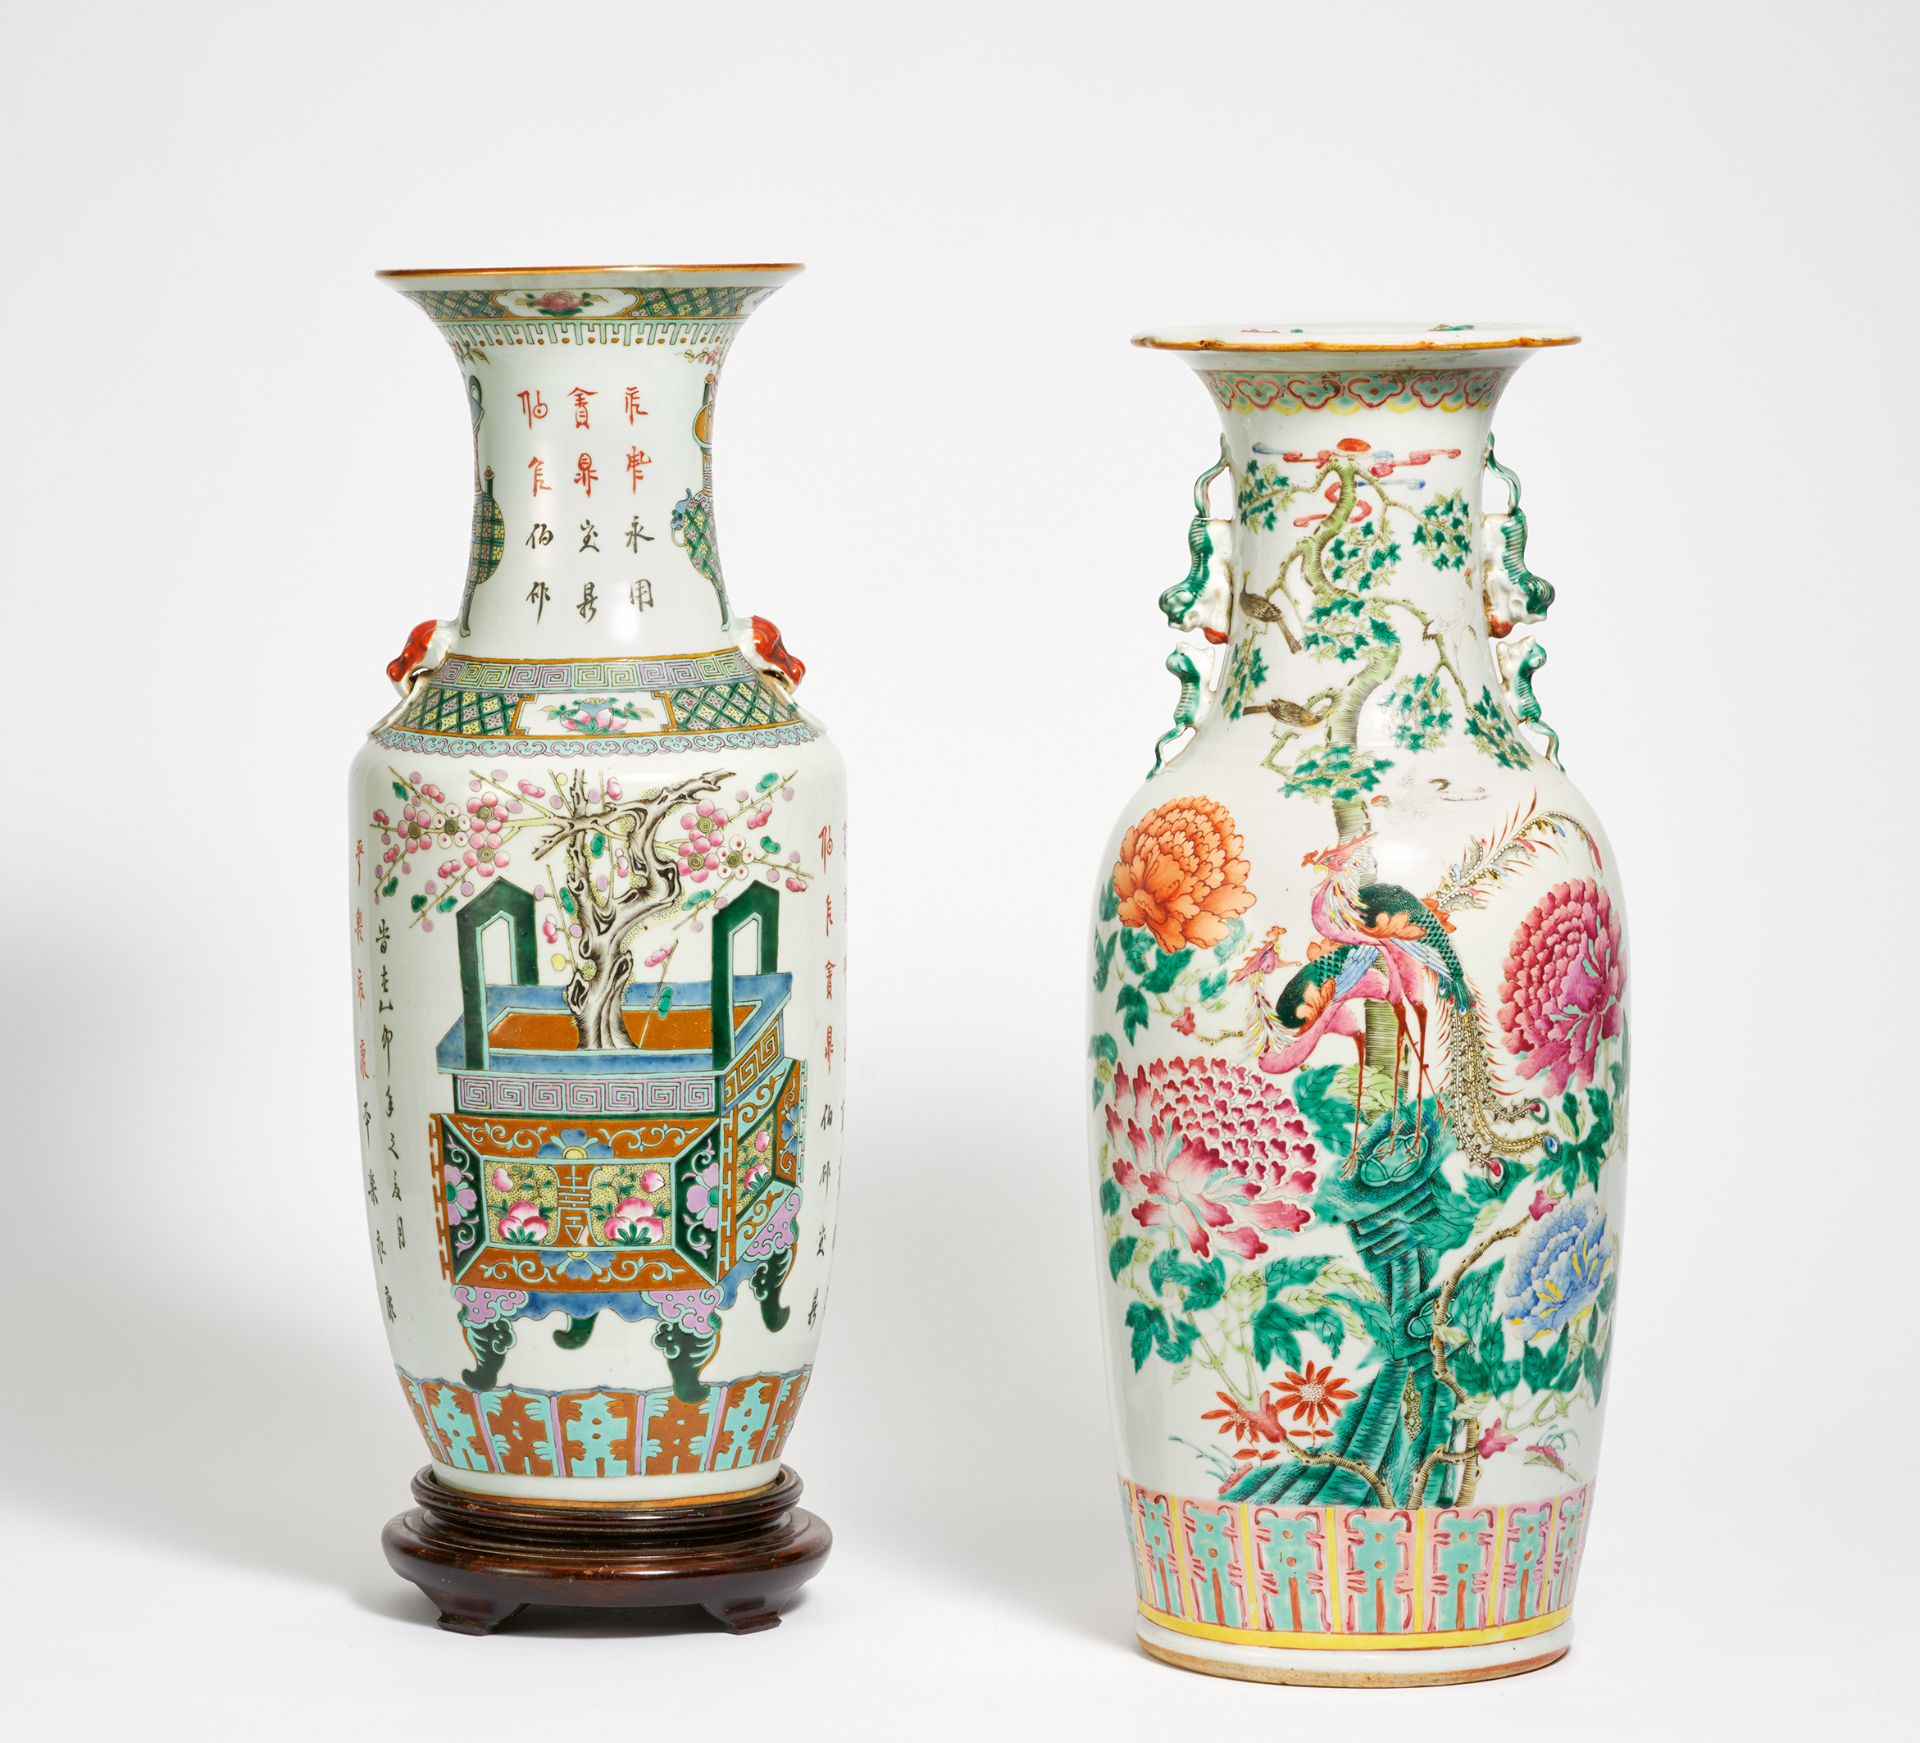 TWO LARGE VASES WITH ANTIQUES AND CALLIGRAPHY RESP. PHOENIX BIRDS IN PEONIES. China. 19th-20th c.